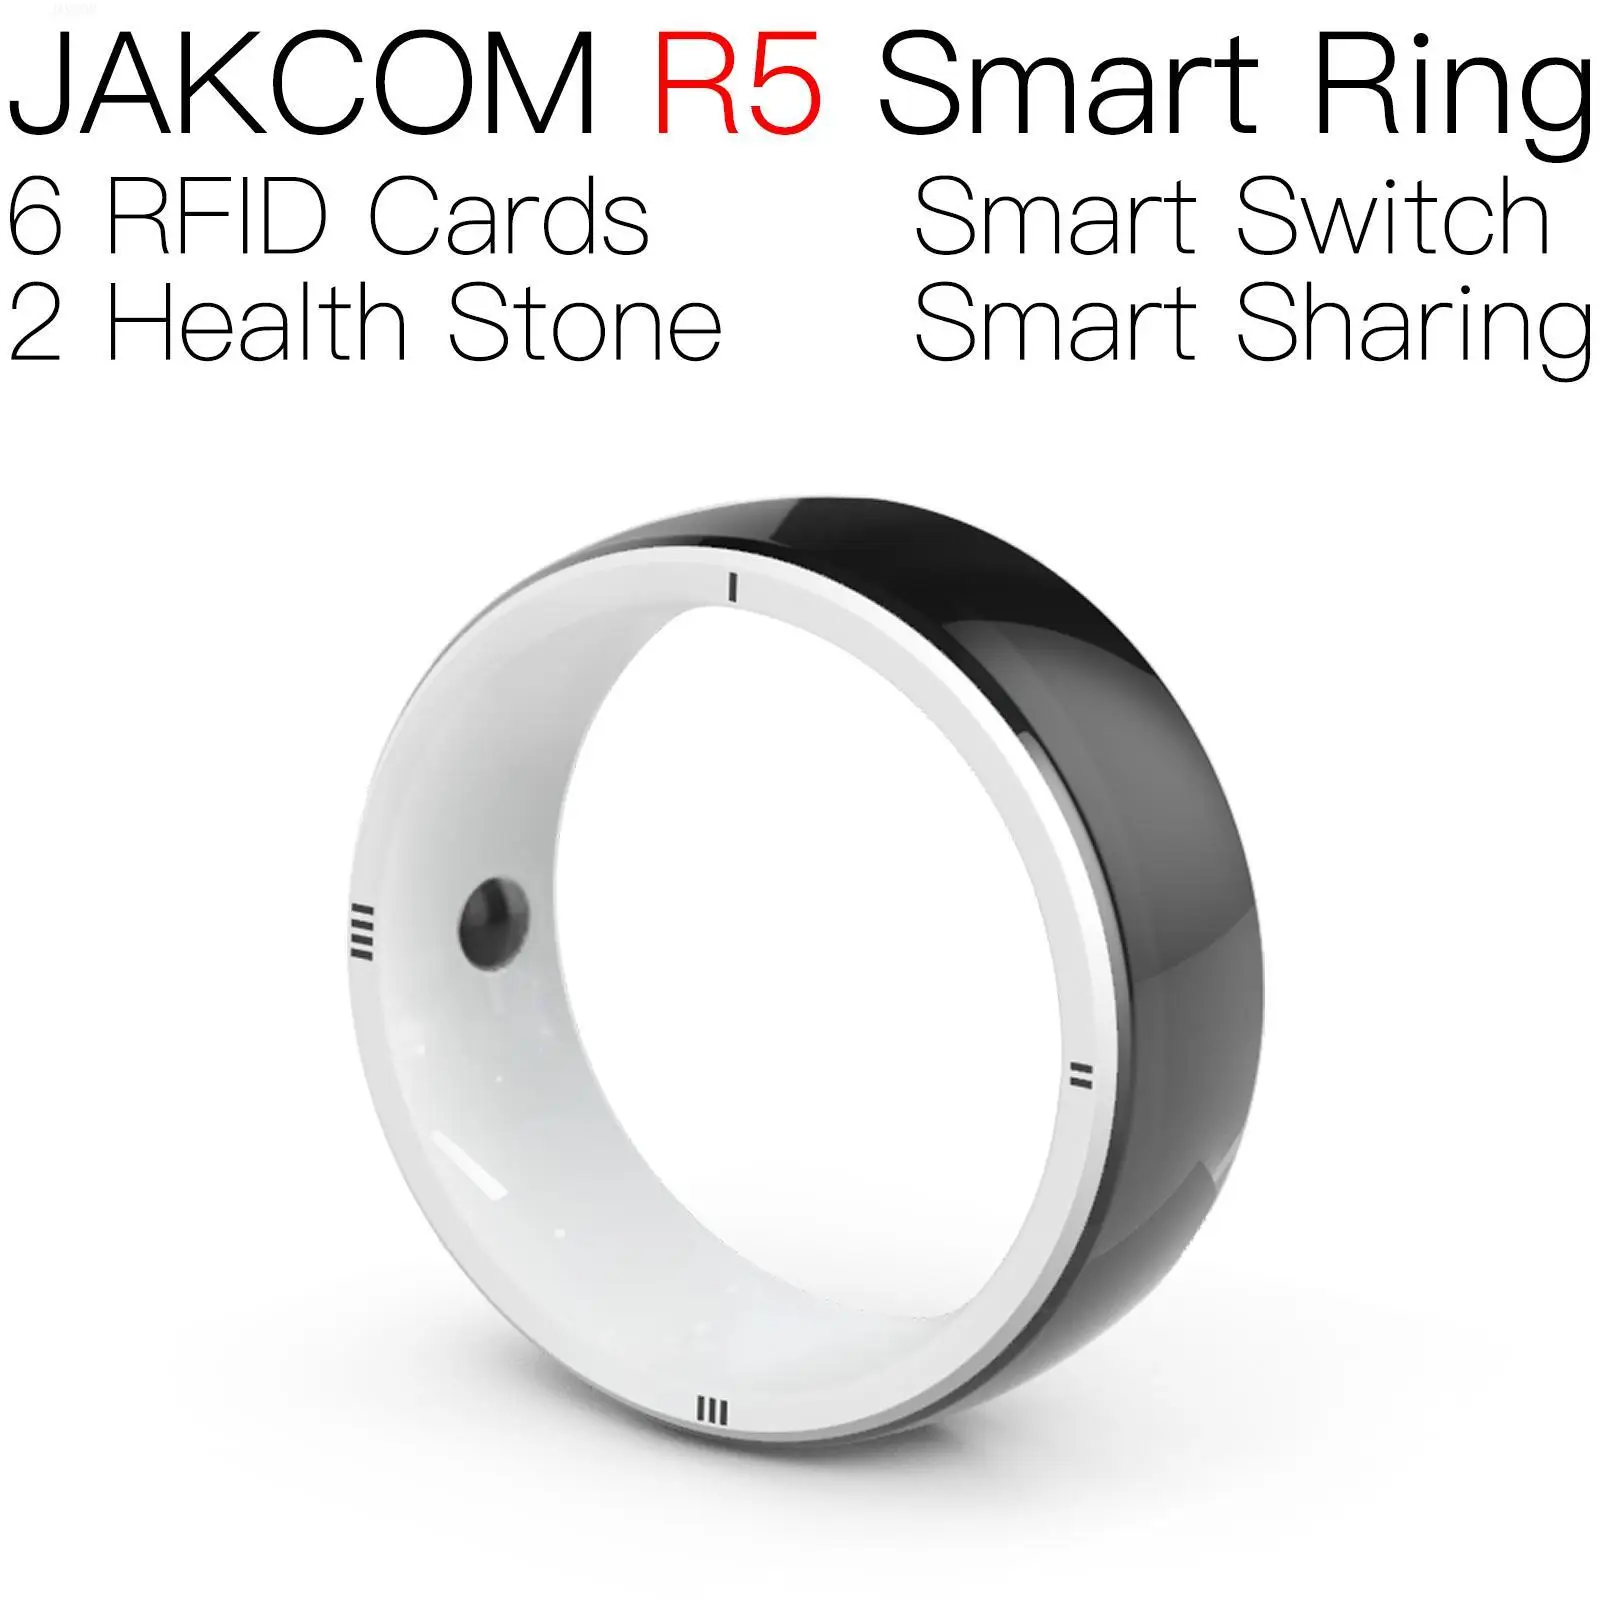 

JAKCOM R5 Smart Ring Nice than rf id tags m26 plus contactless 14443a smart ic card reader for rfid chip mhz tag cow cattle key